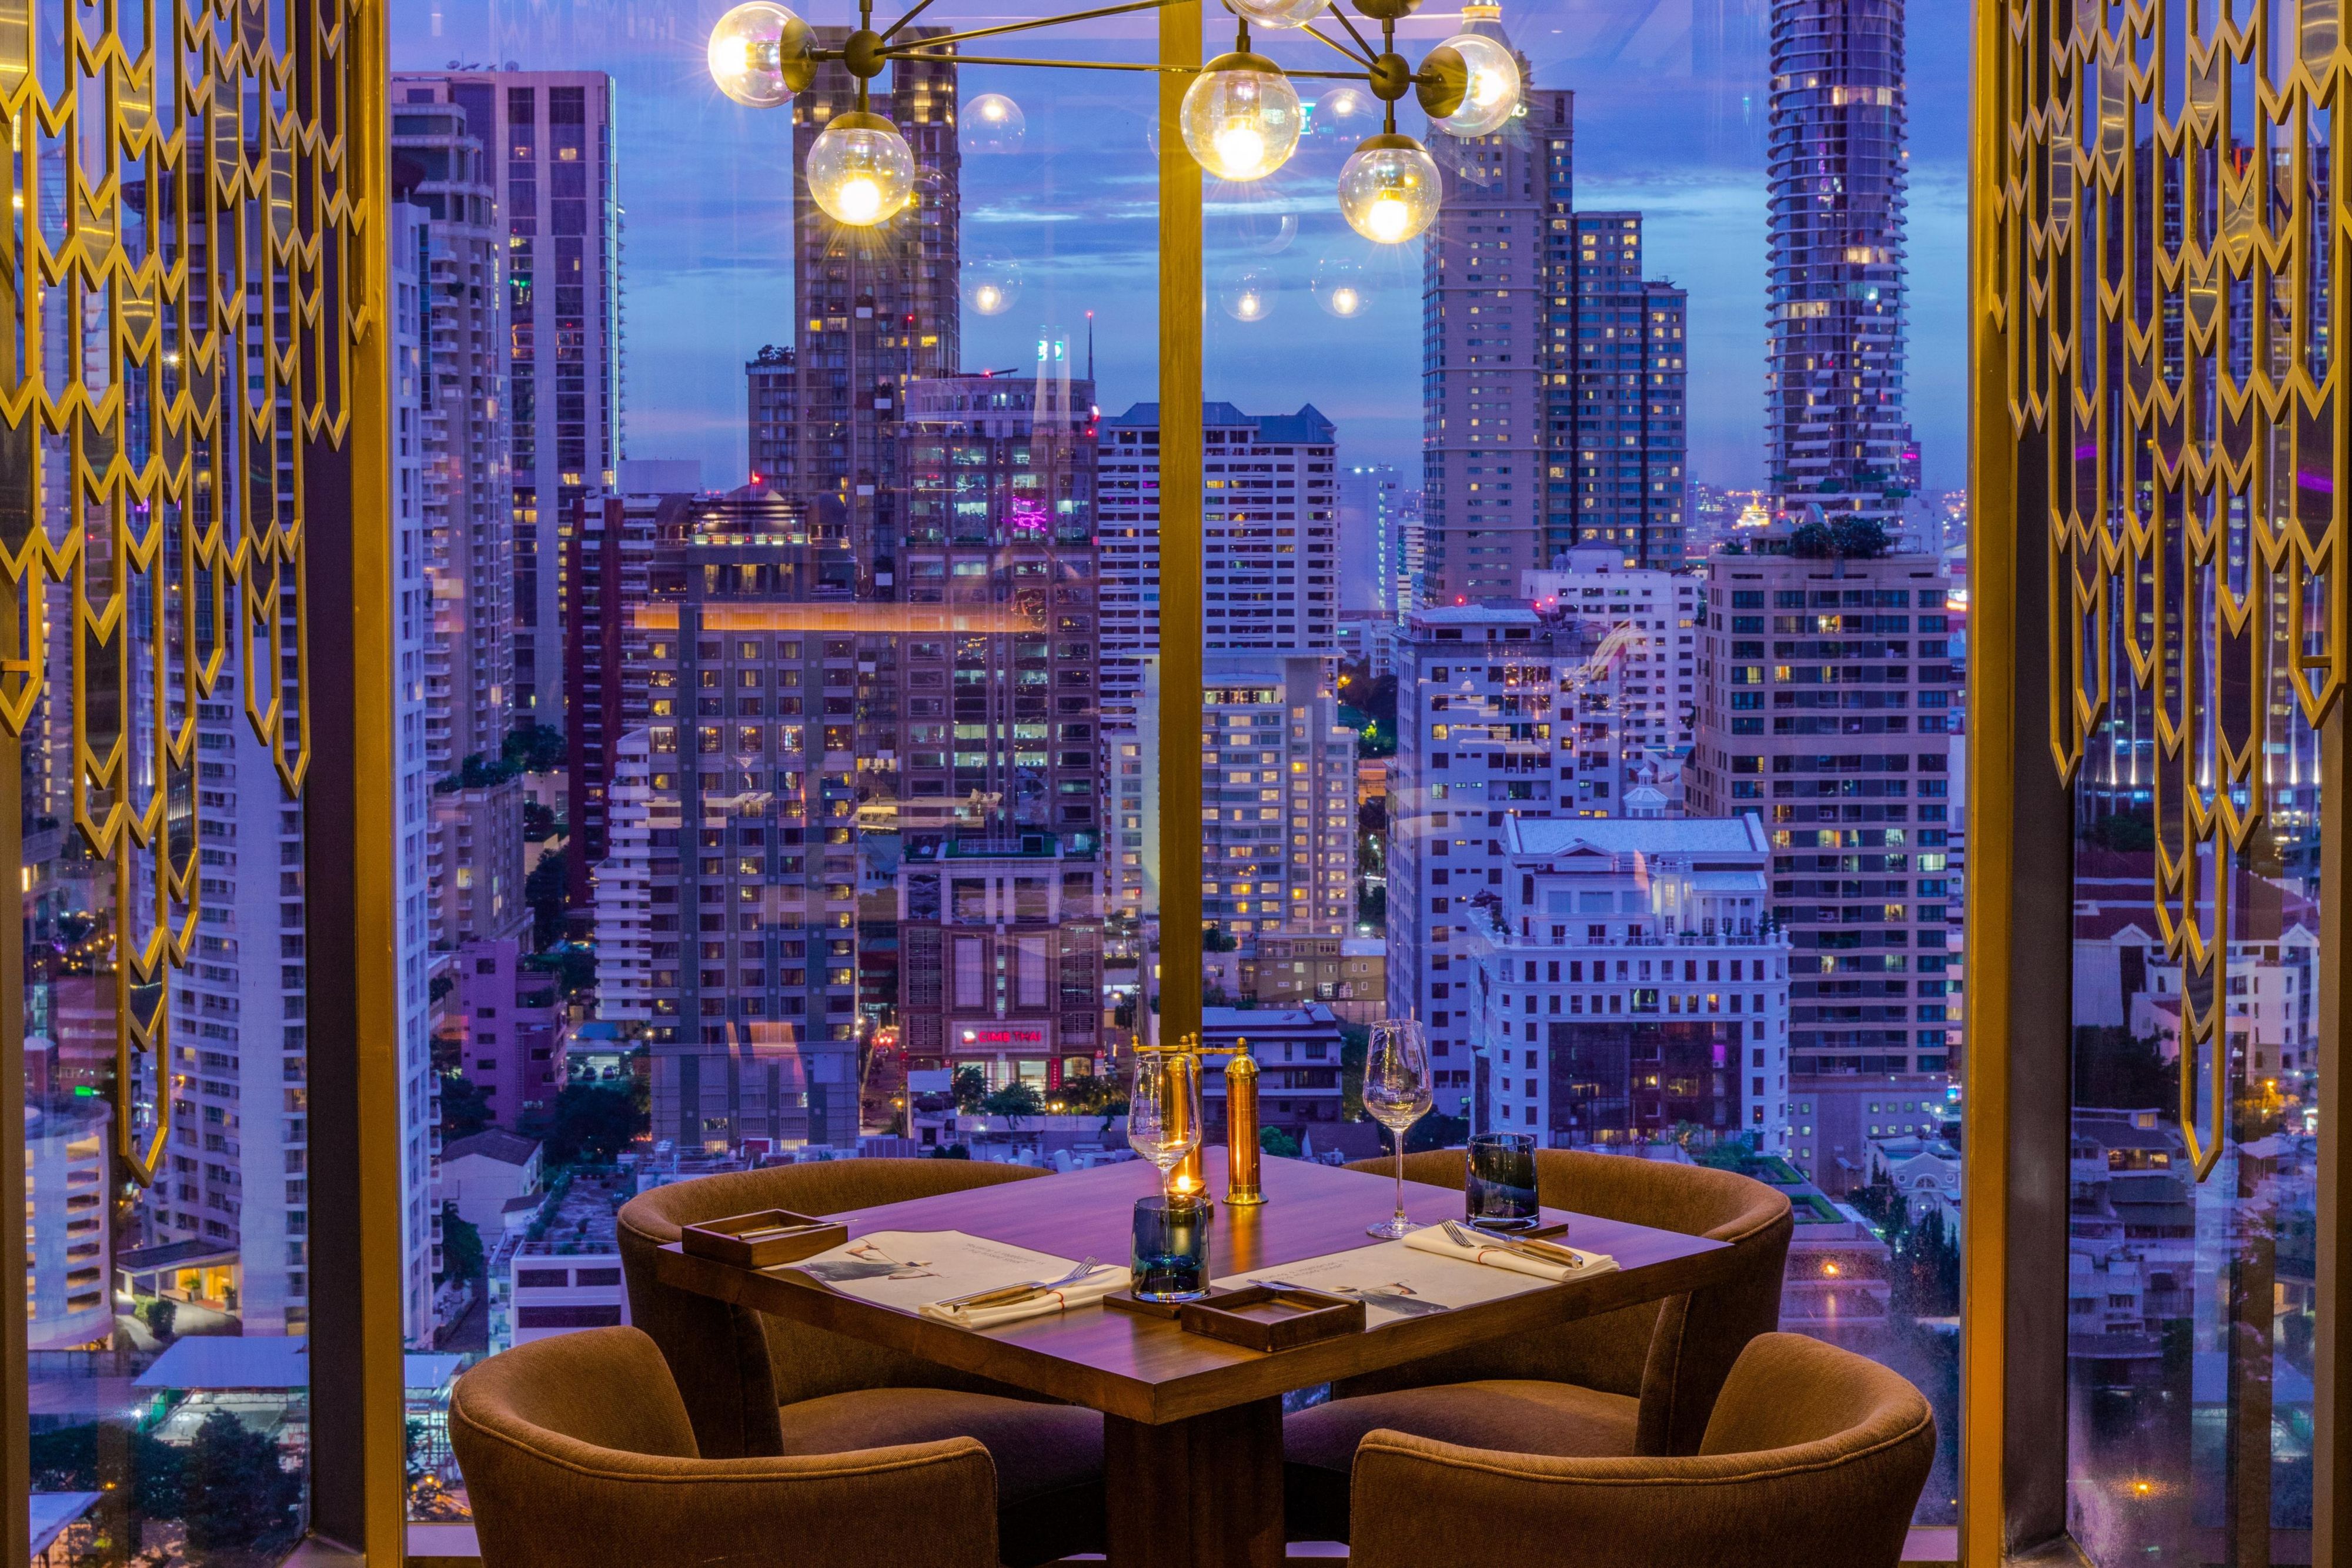 Savour premium meats and seafood all grilled to perfection at CHAR Restaurant, while CHAR Rooftop Bar offers uniquely-crafted cocktails, live music and inspiring city views for you to unwind. Whether it is an intimate gathering or a large celebration, we ensure you vibrant evenings with great hospitality at CHAR Bangkok’s three distinctive venues.